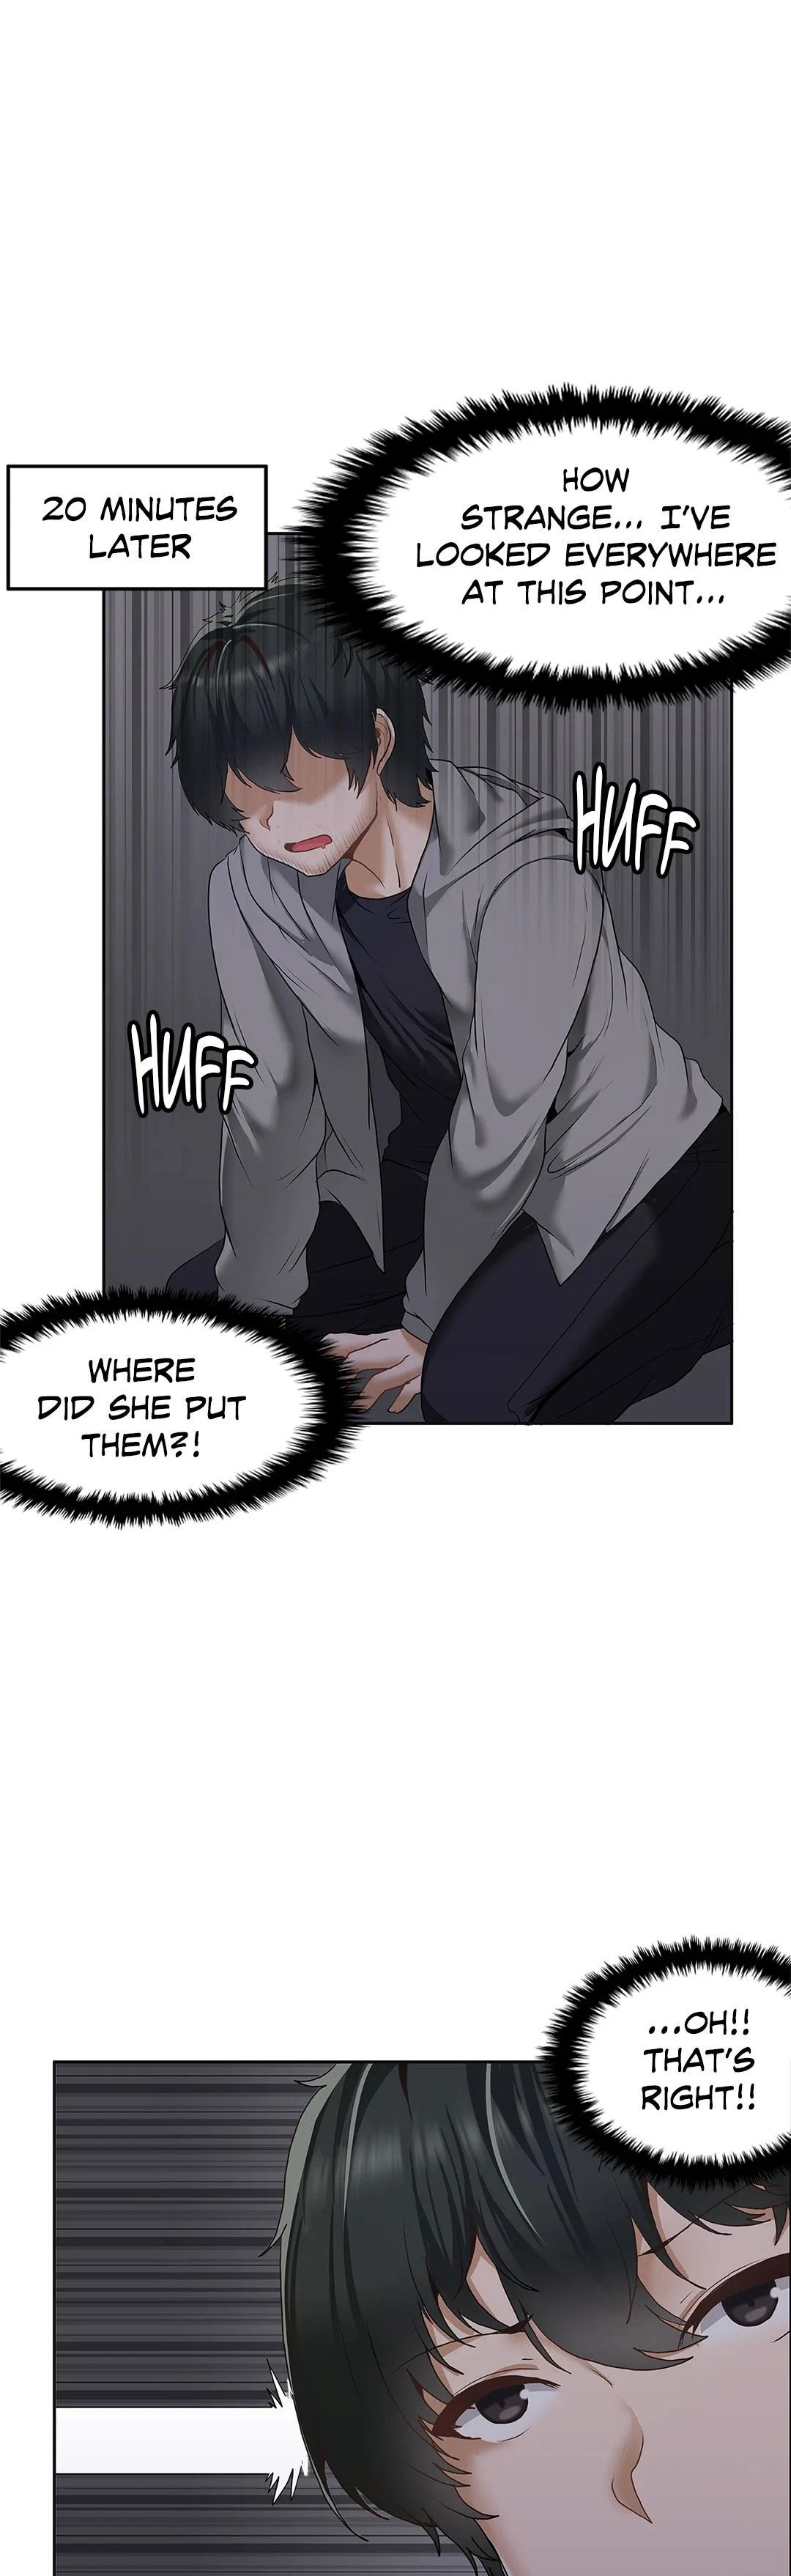 the-two-eves-the-girl-trapped-in-the-wall-chap-3-2